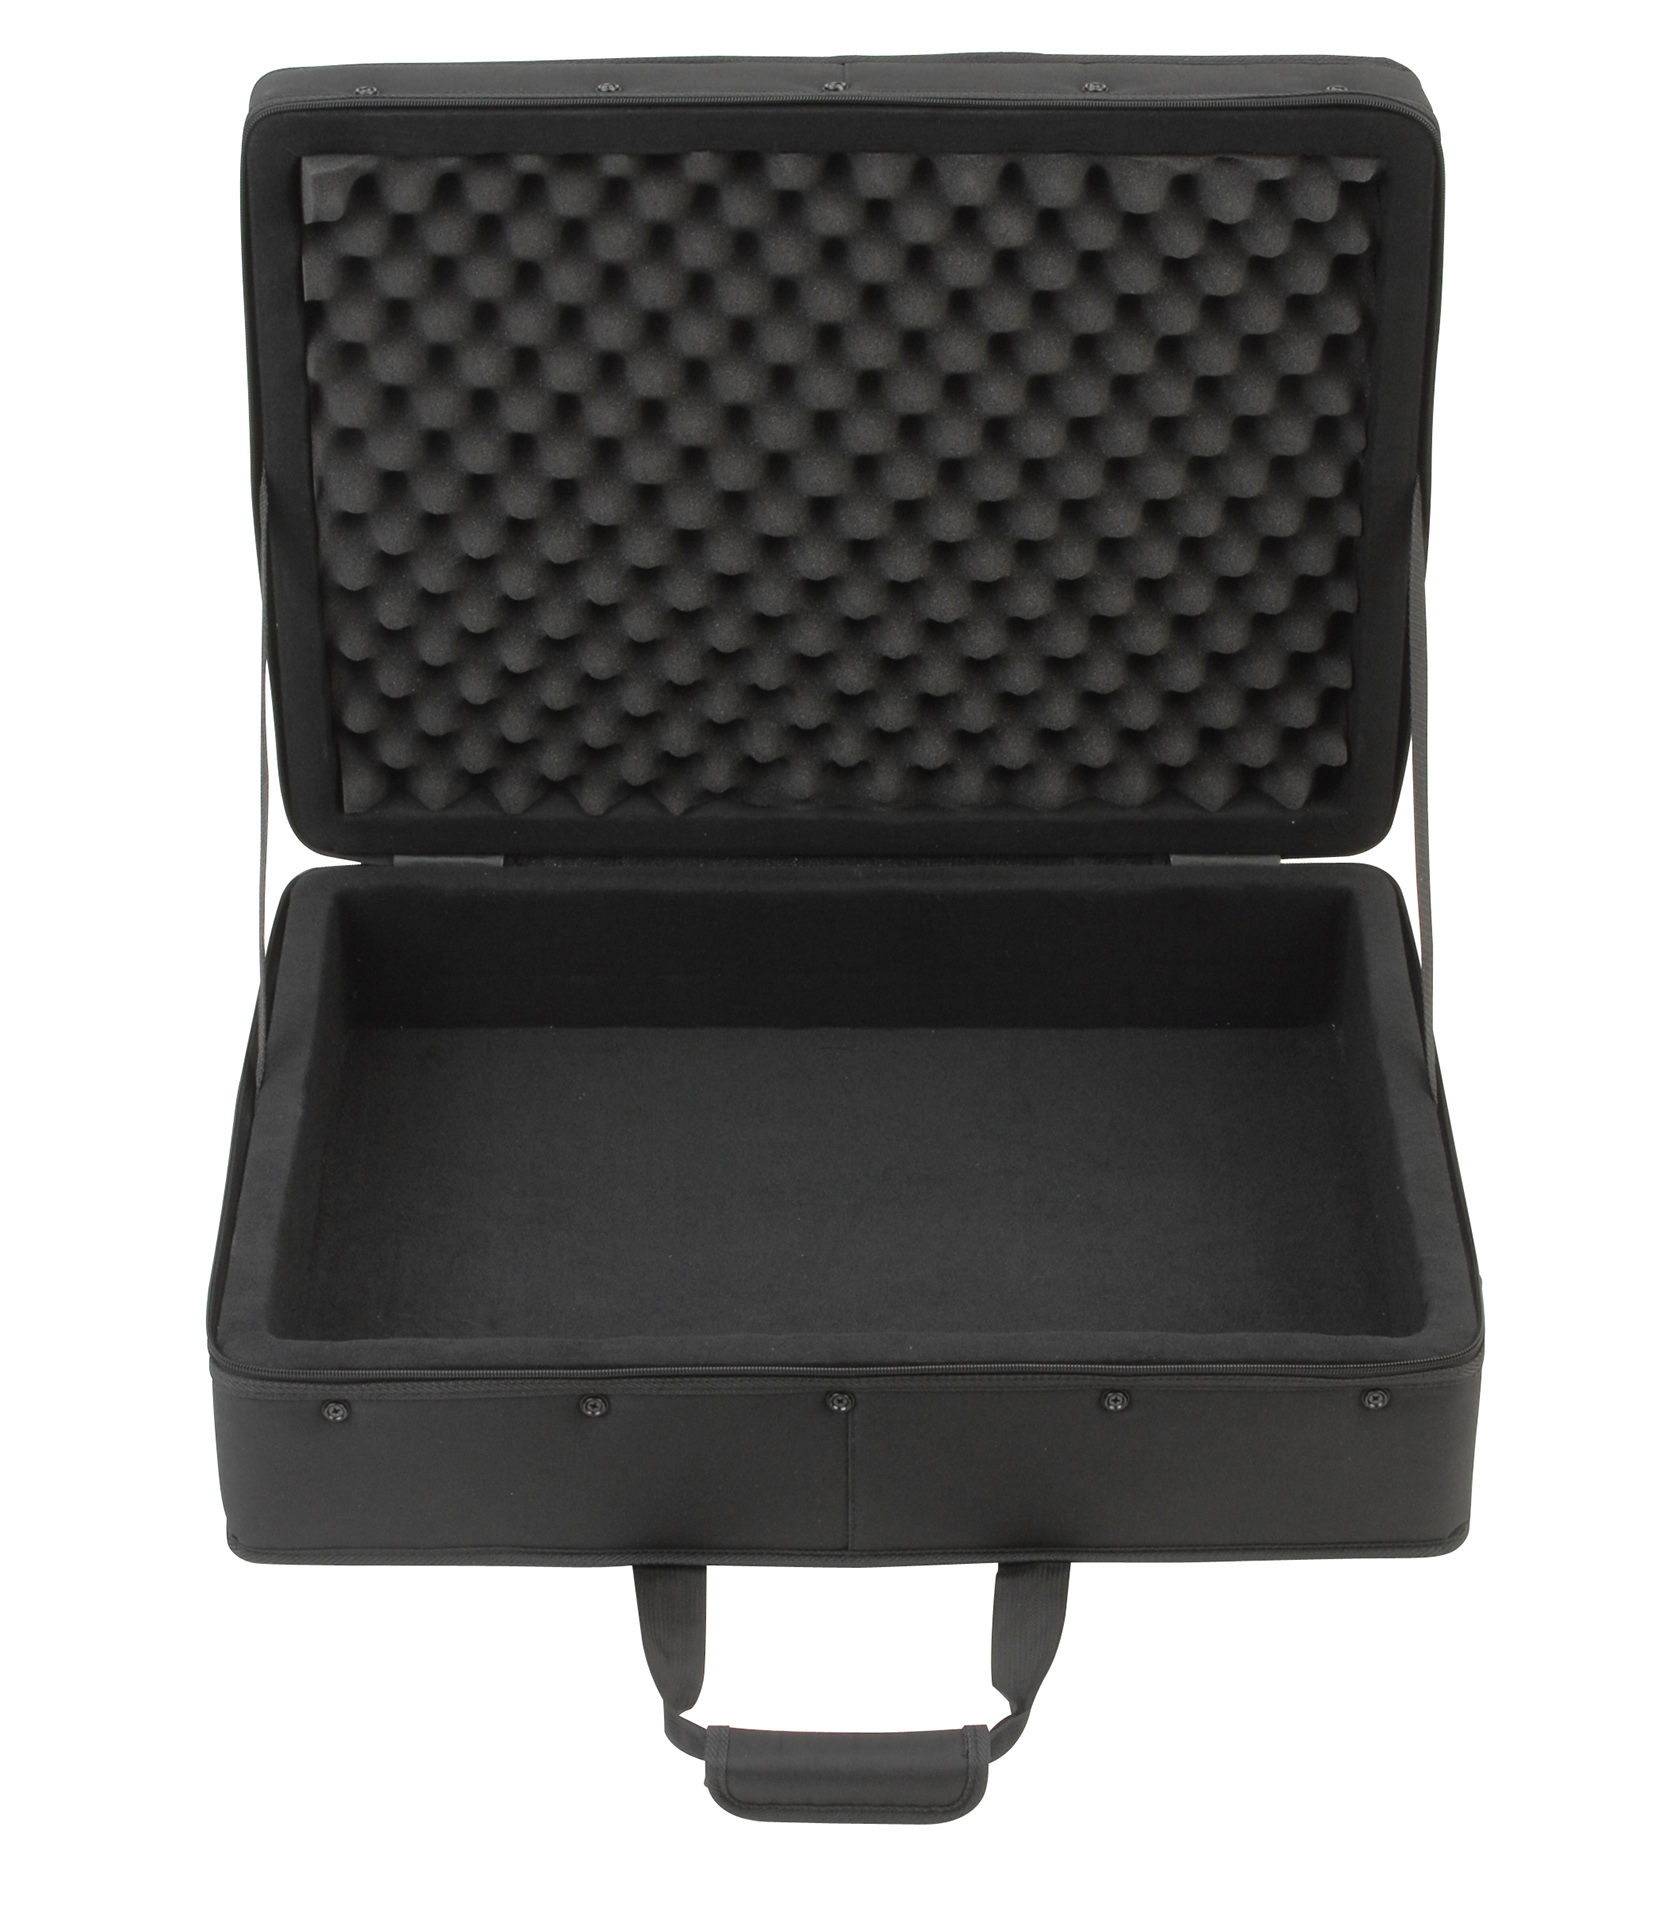 1SKB SC2316 Pedalboard Soft Case for PS 8 and PS - 1SKB-SC2316 - Melody House Dubai, UAE